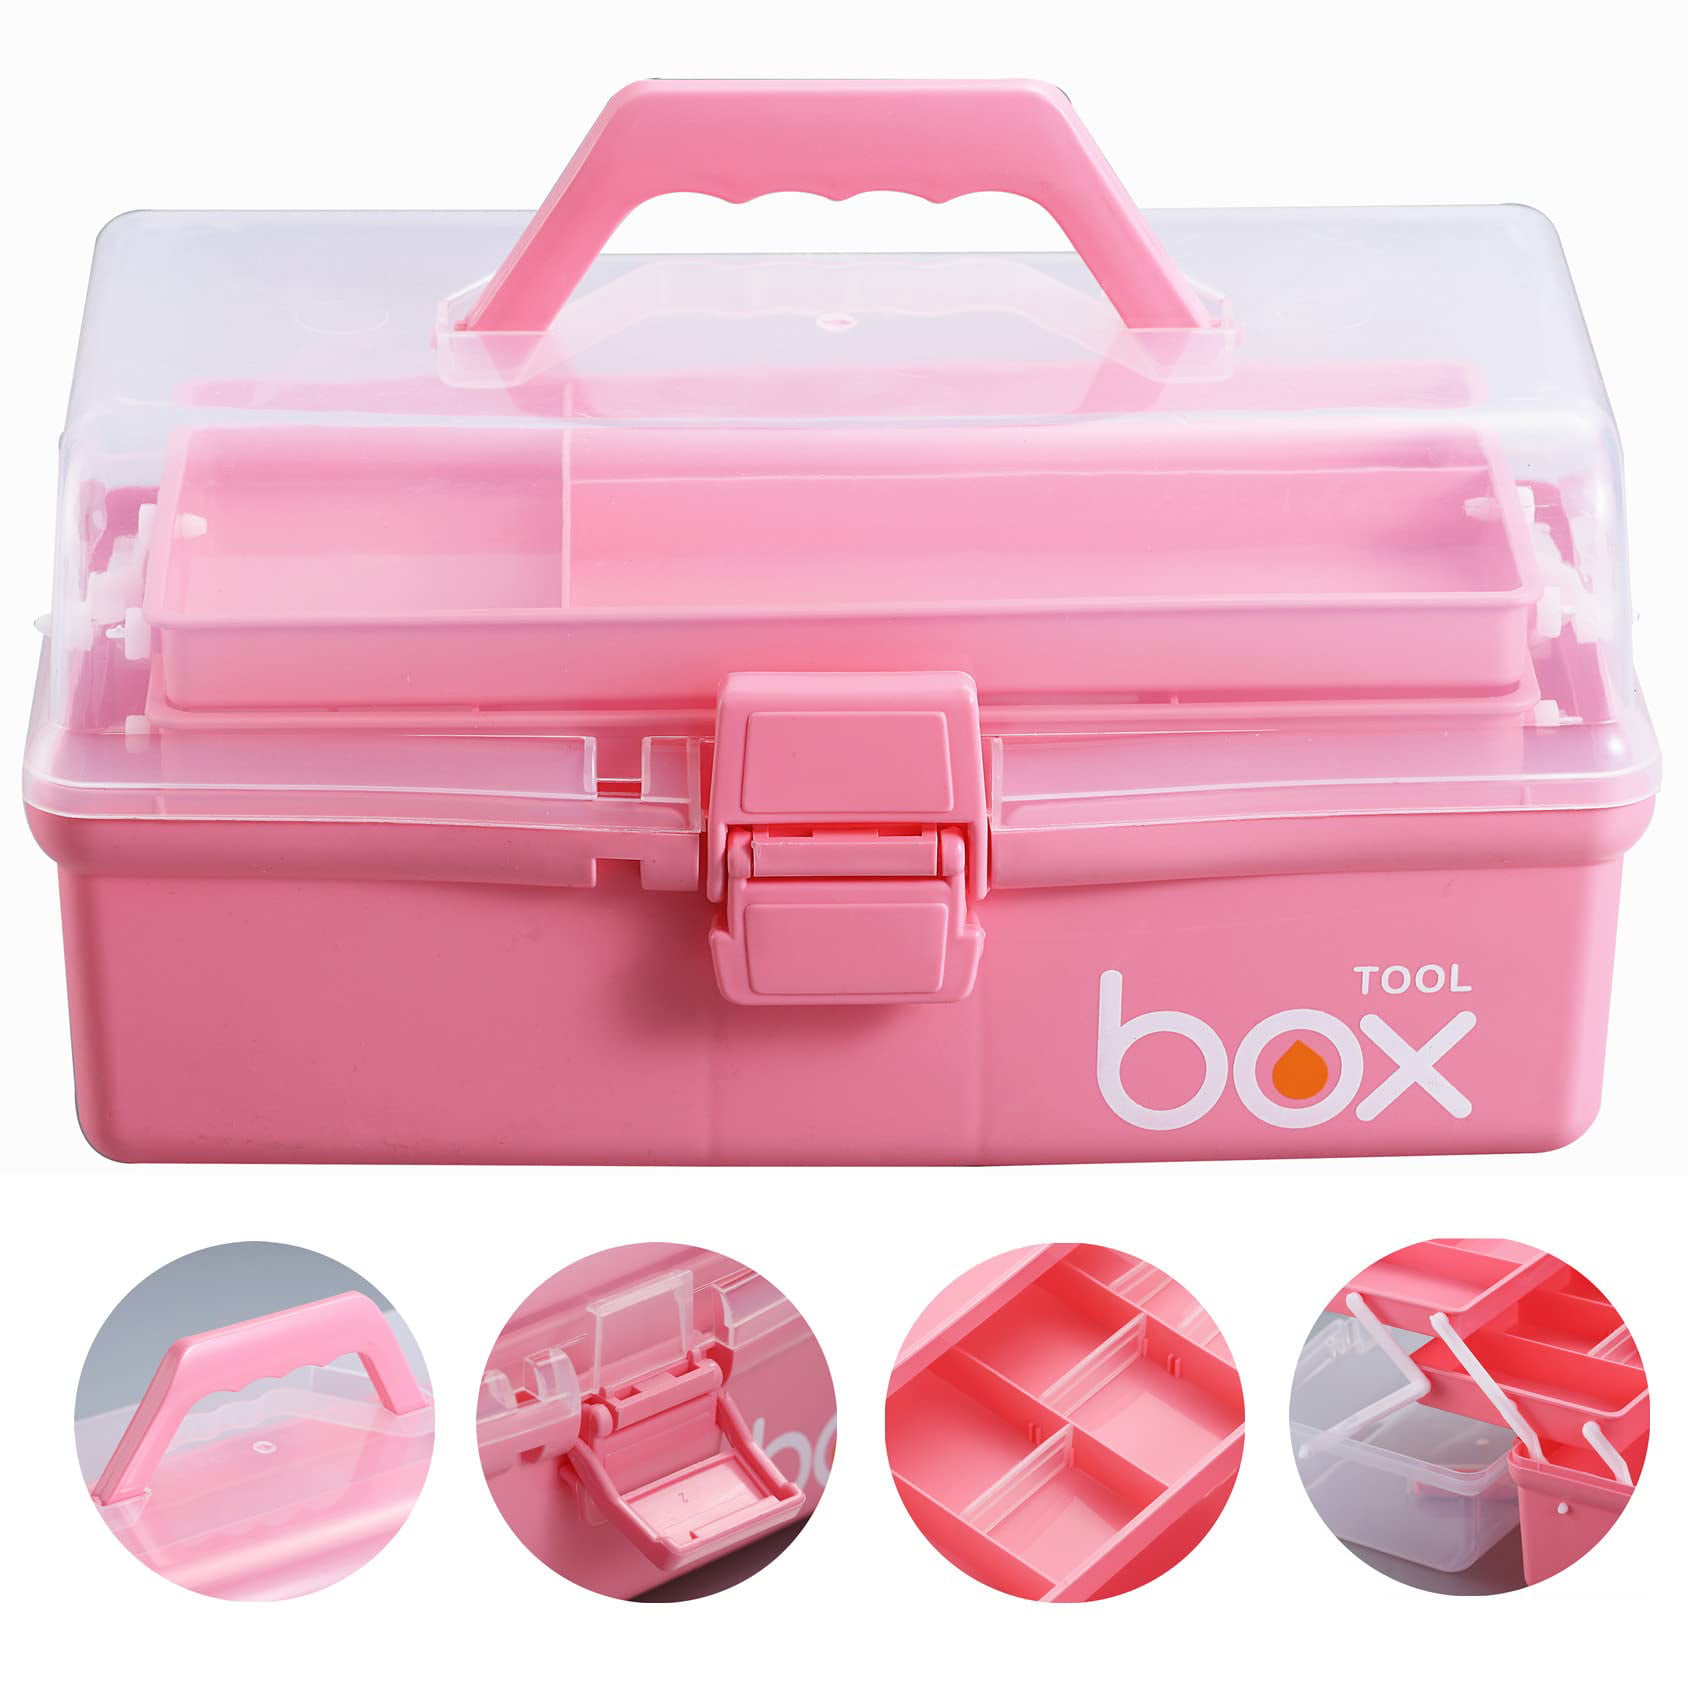  HengLiSam 12'' Three-Layer Clear Plastic Storage Case for Art  Craft and Cosmetic, Multipurpose Organizer and Portable Handled Storage Box  for Home, School, Office (Pink) : Arts, Crafts & Sewing